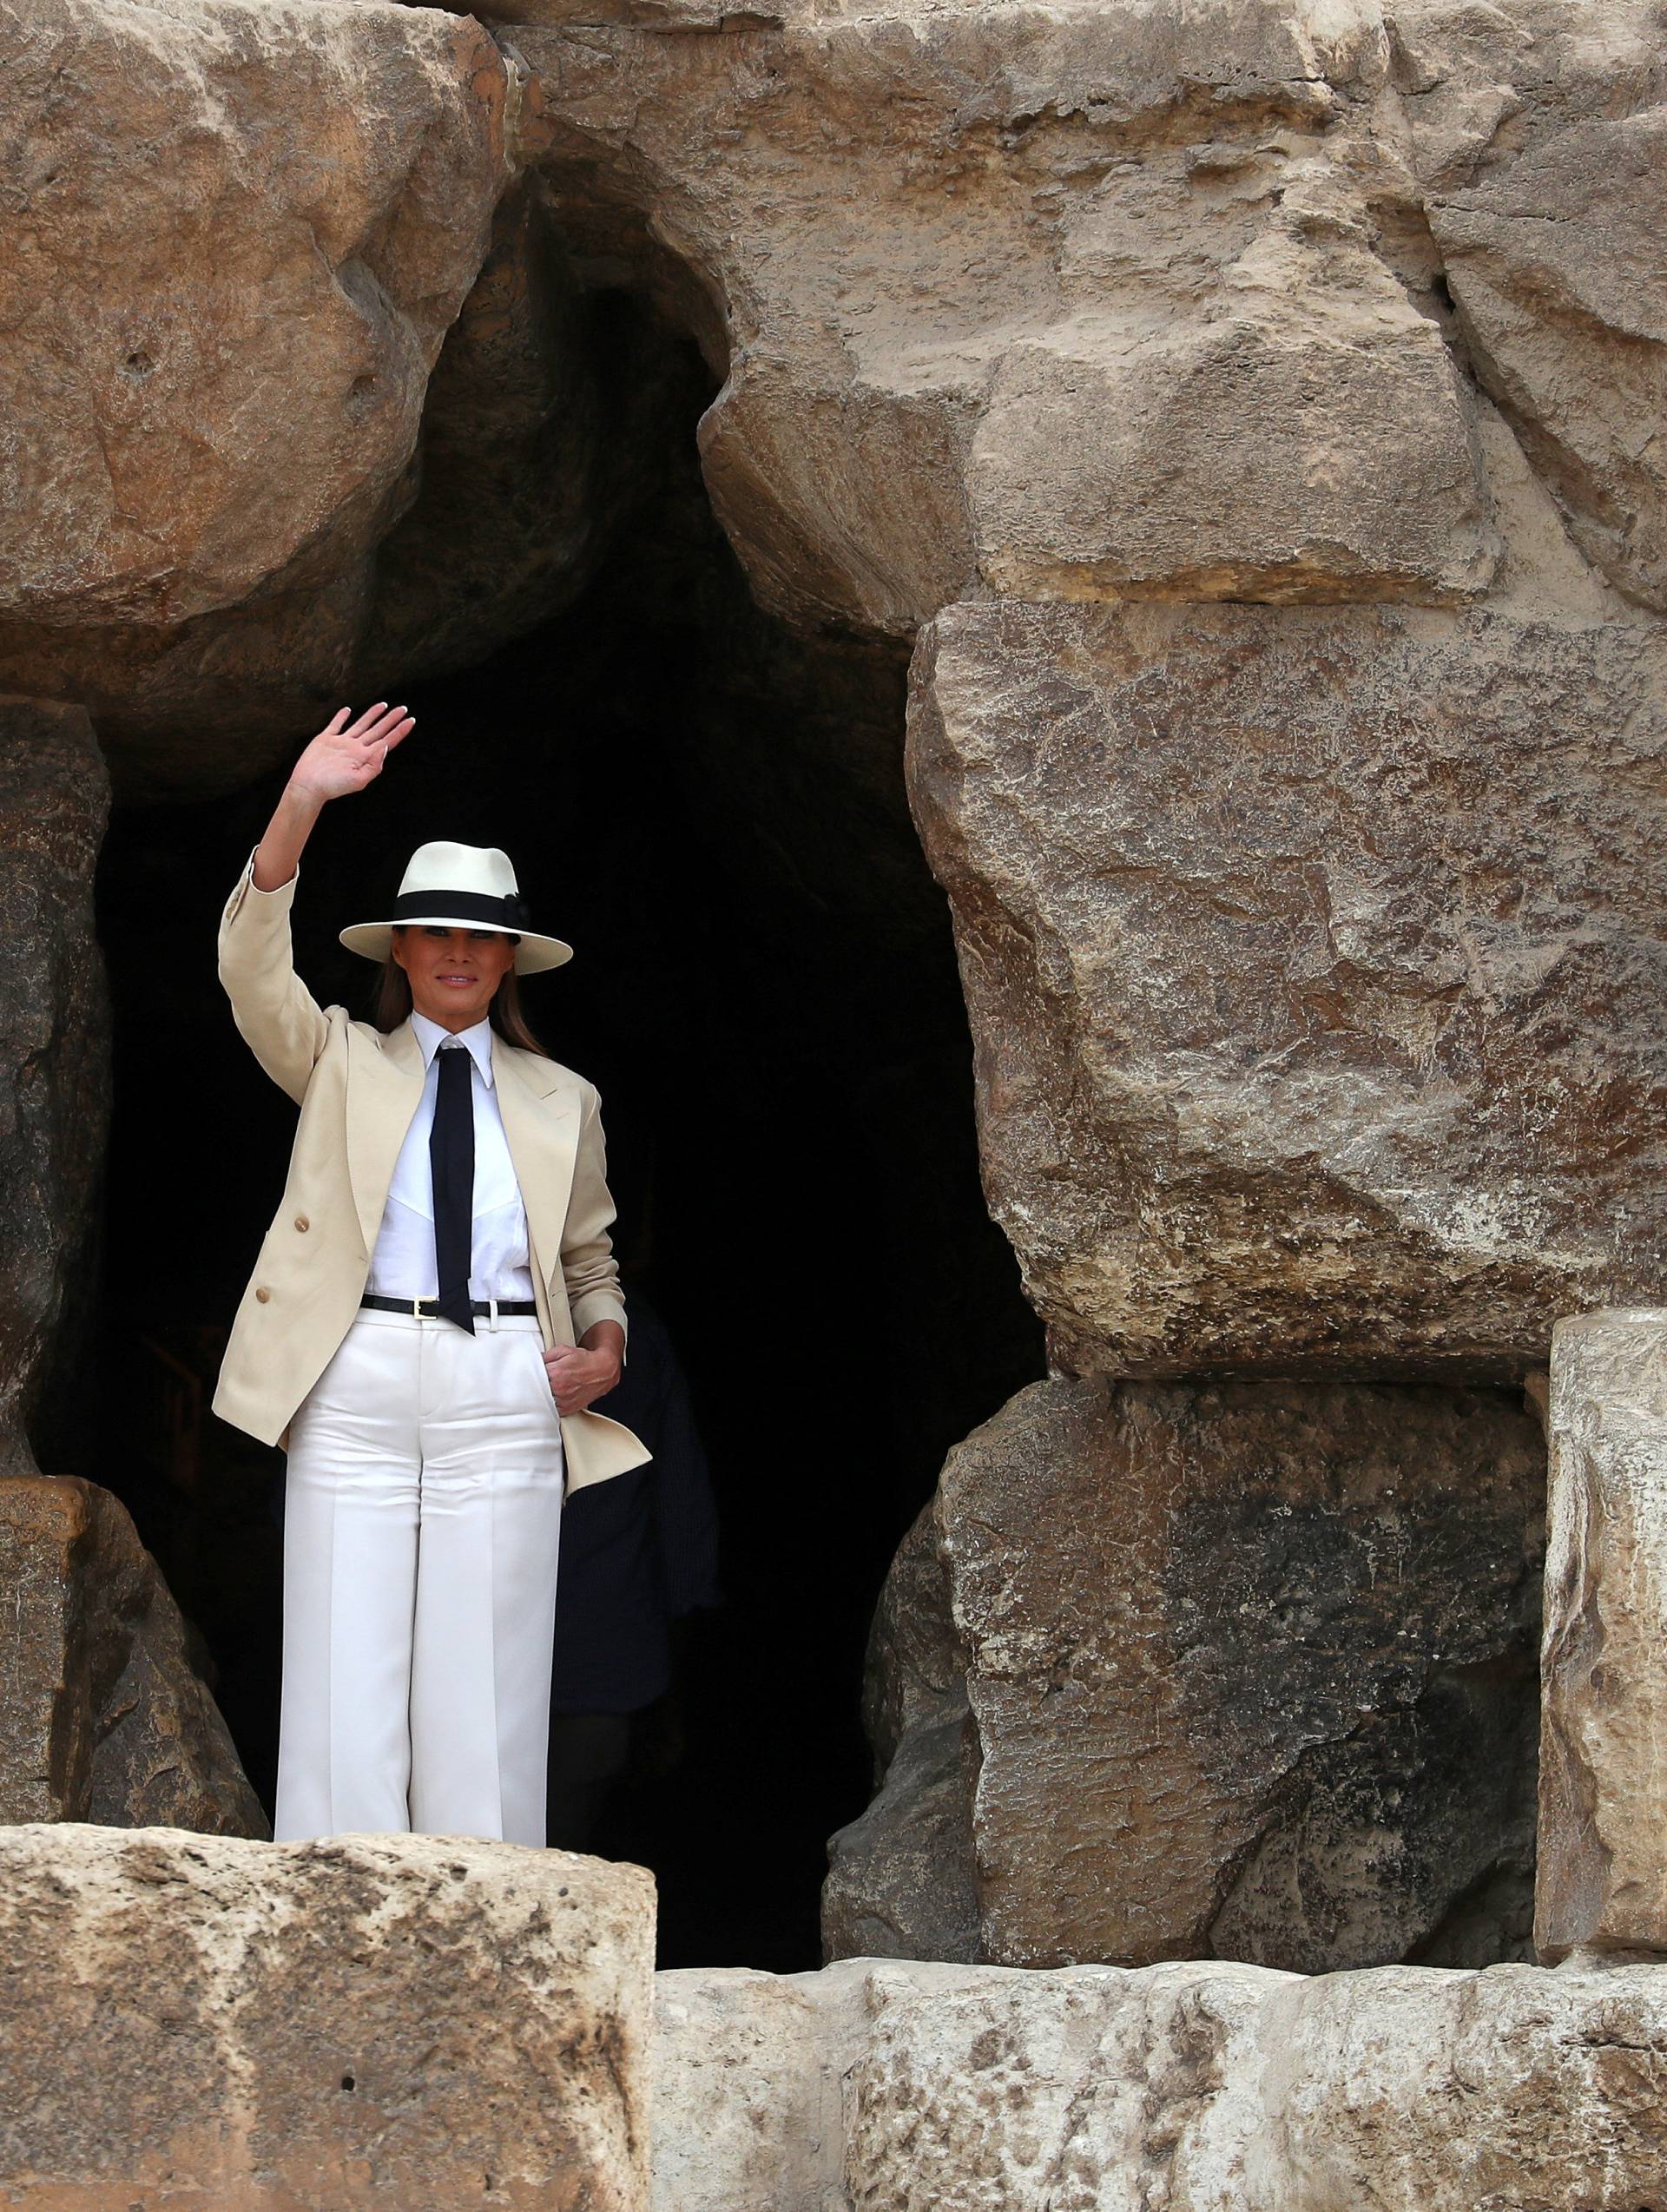 U.S. first lady Melania Trump visits the Pyramids in Cairo